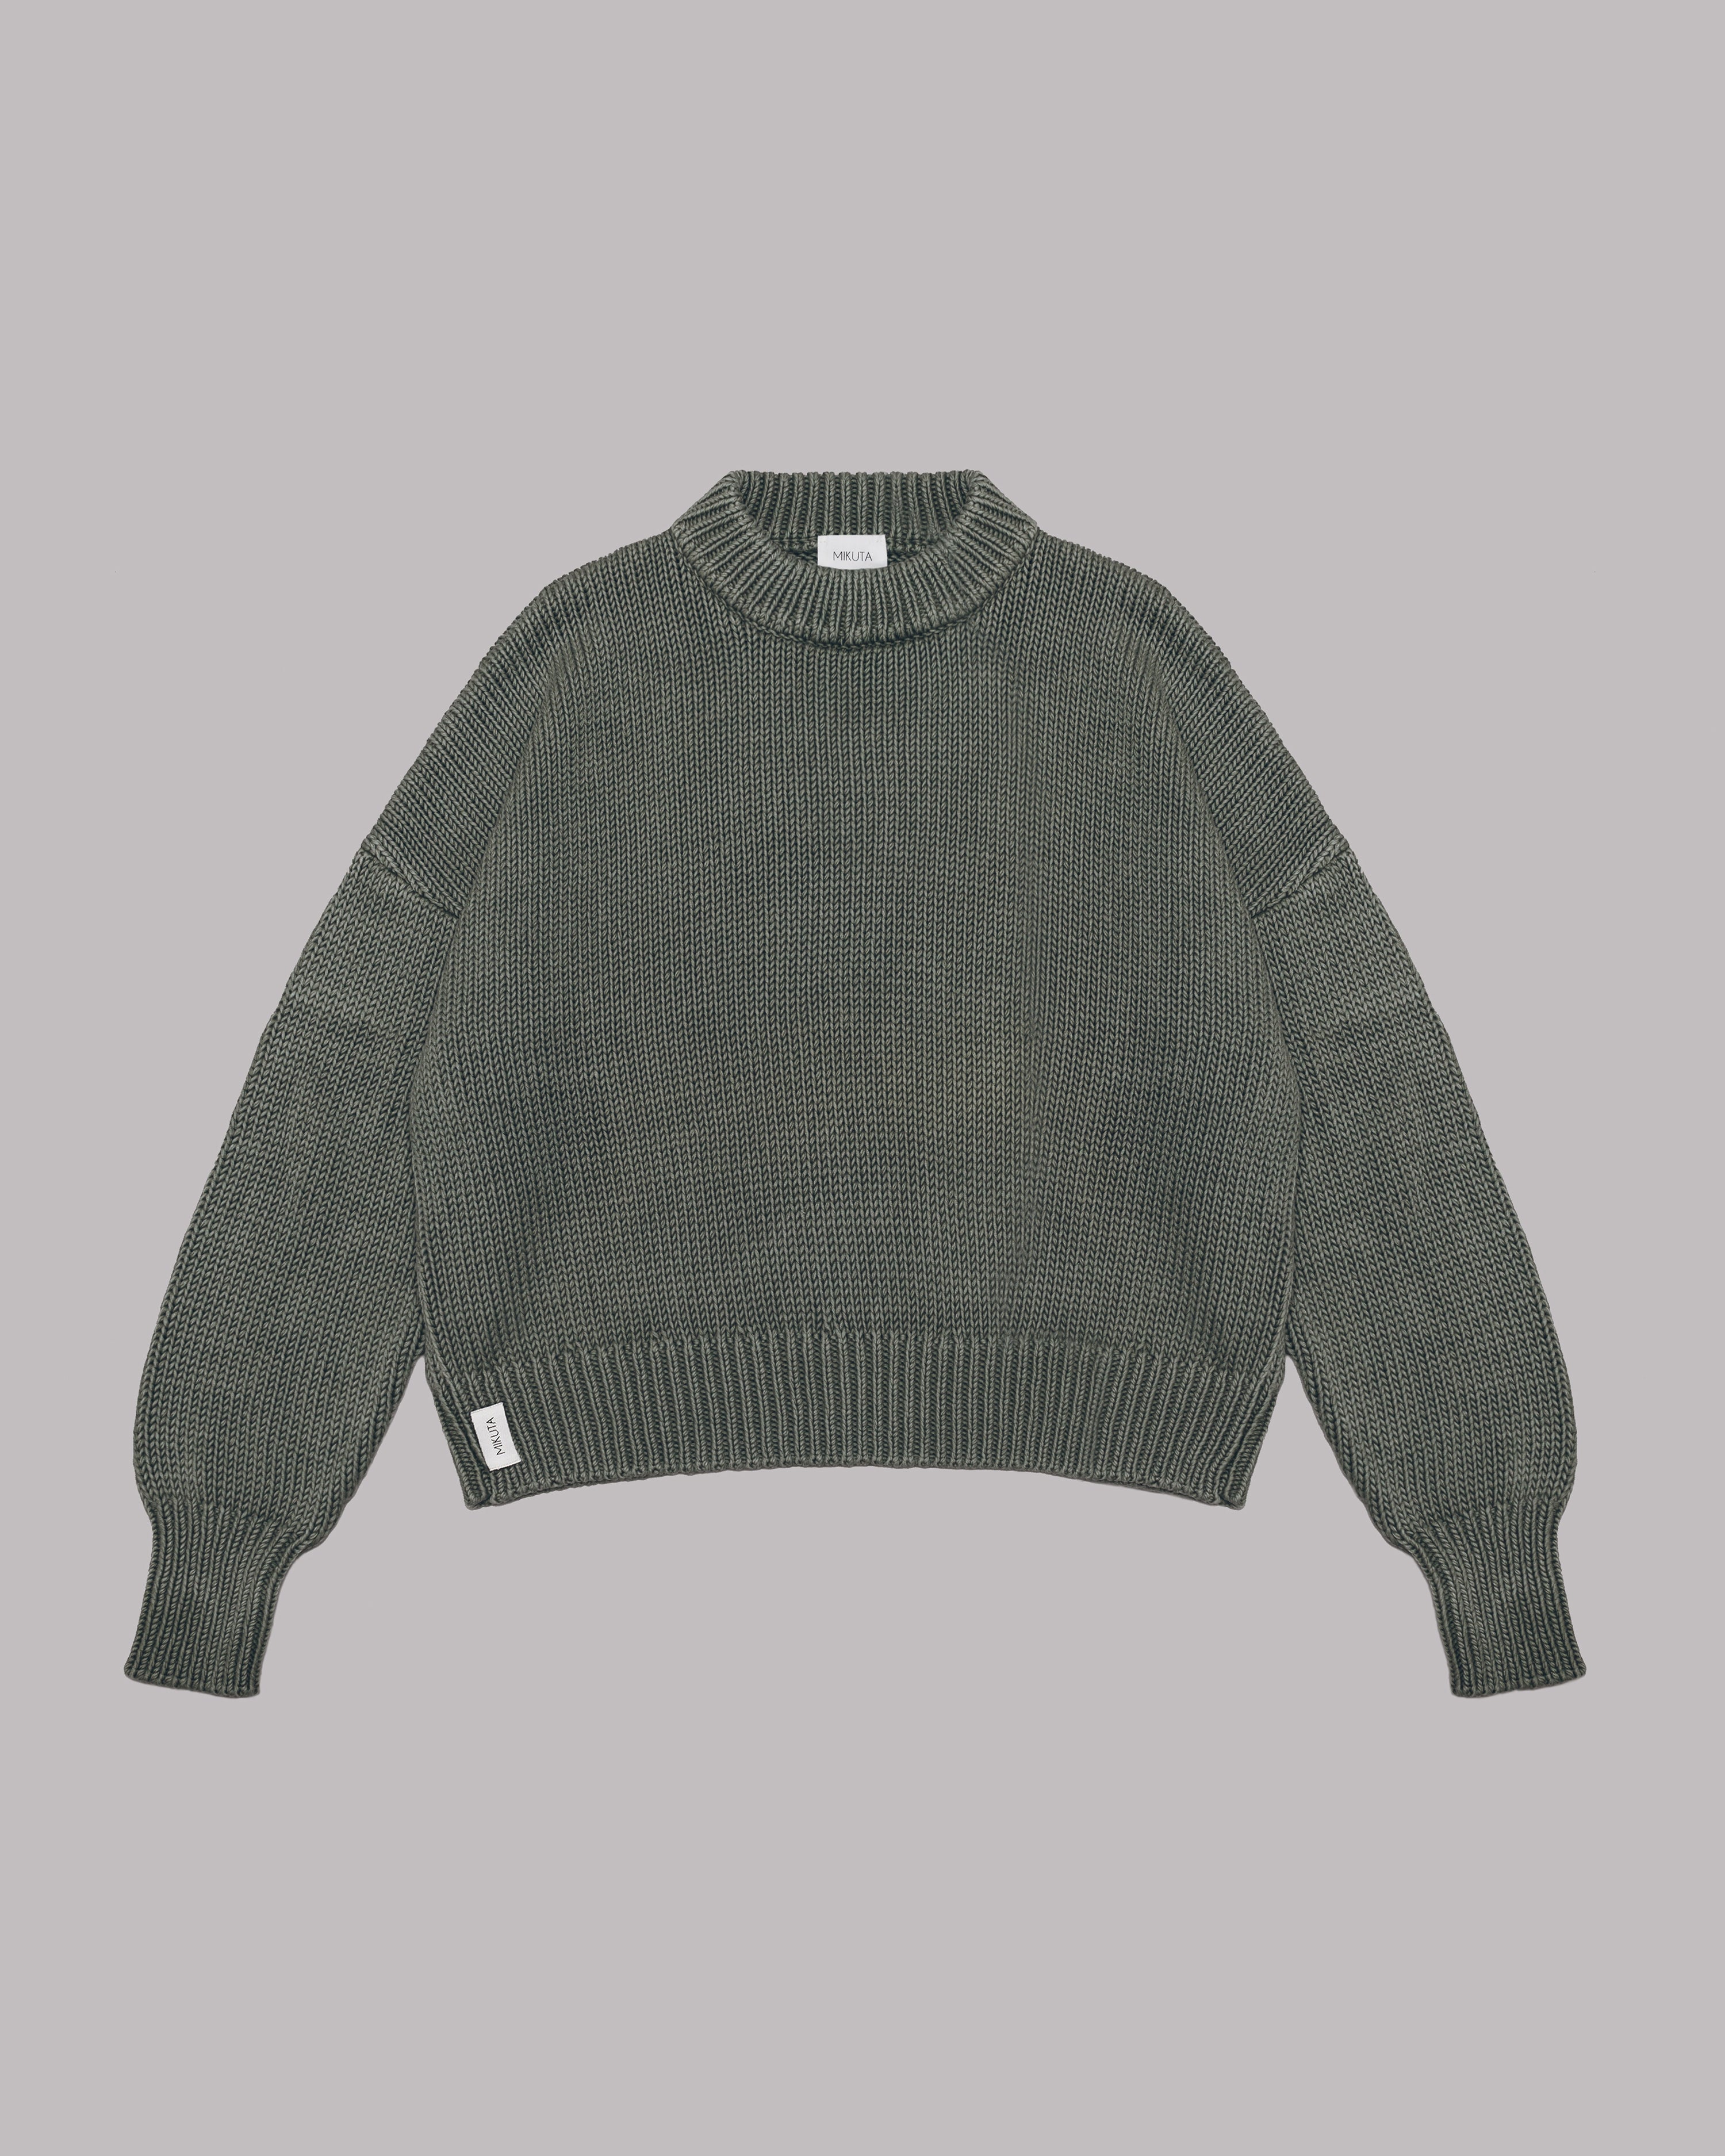 The Green Faded Knit Sweater